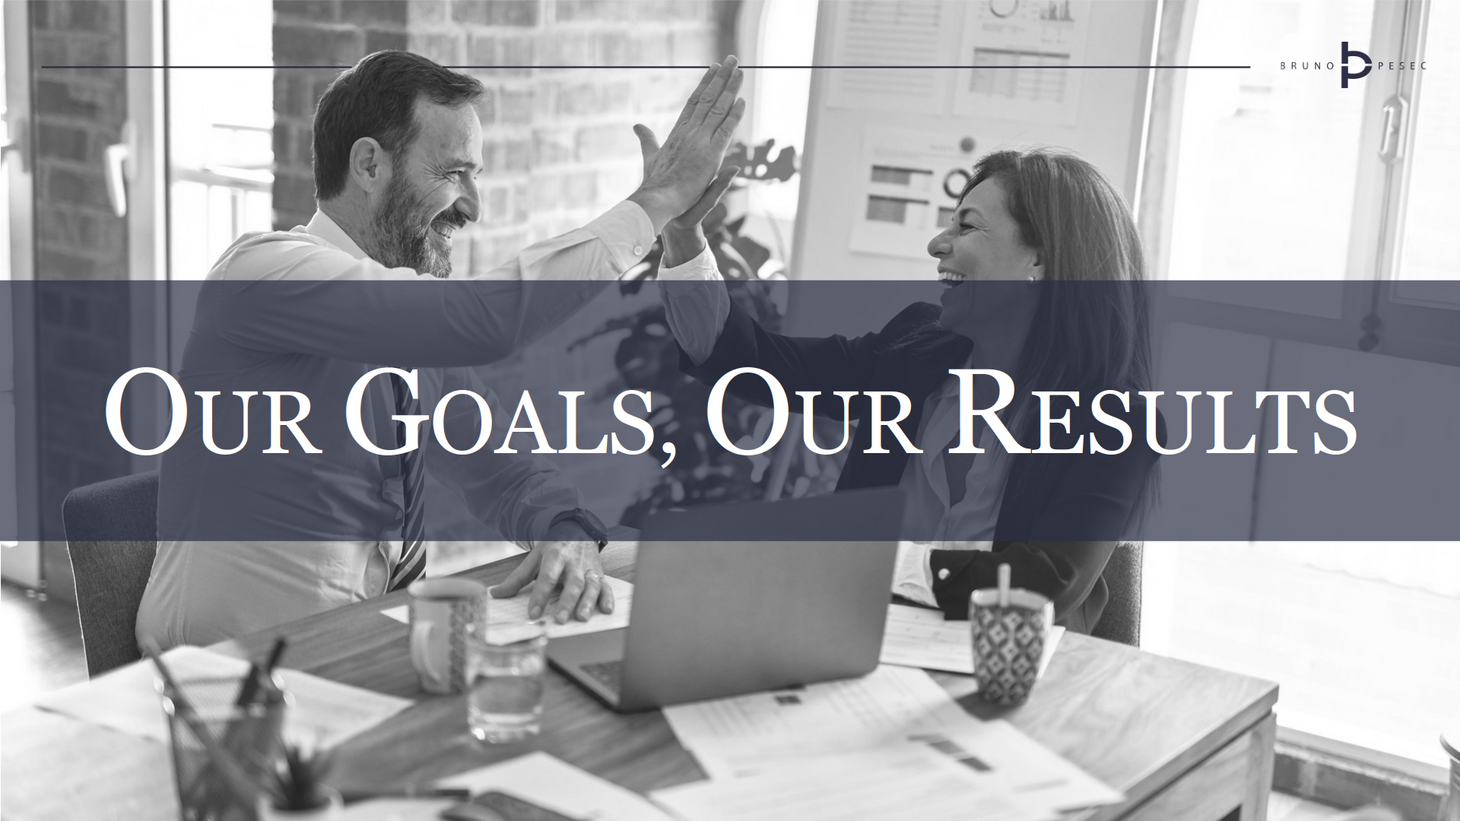 Our goals, our results